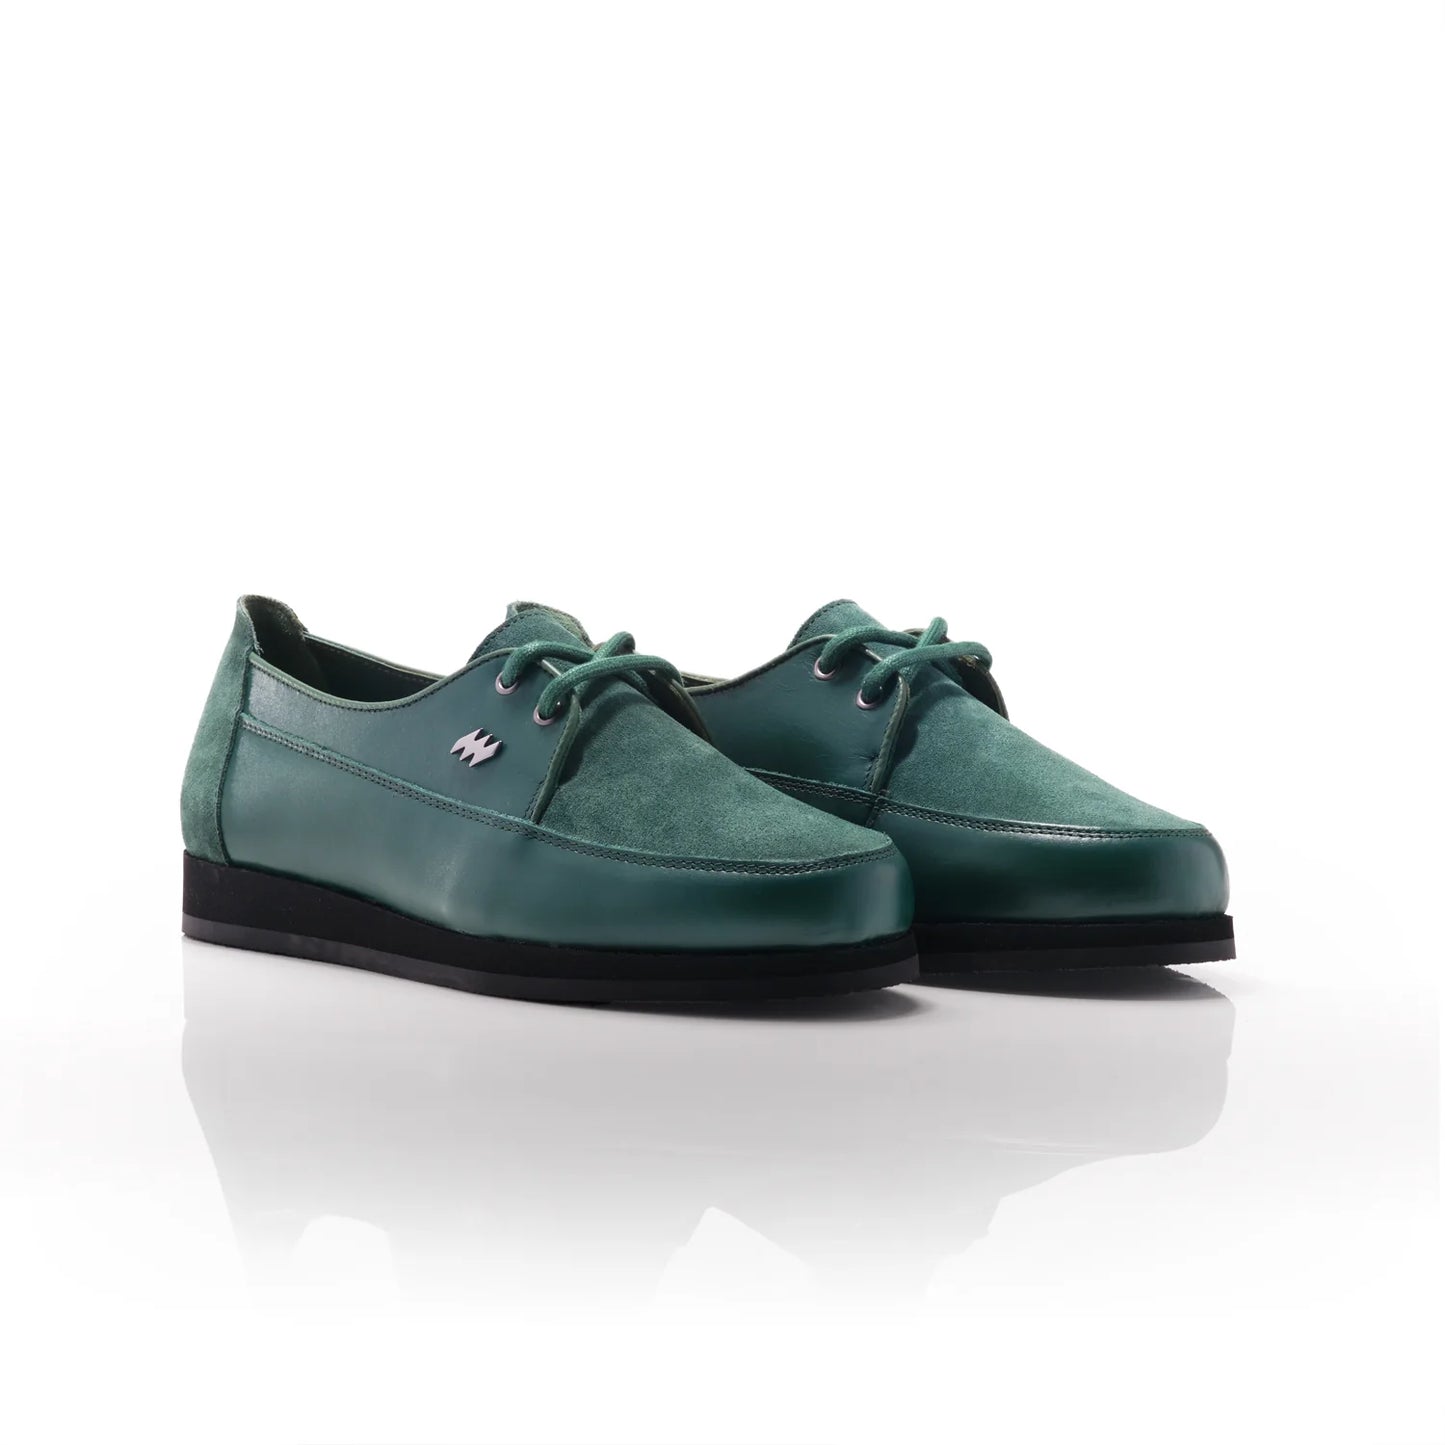 MIRAGE GREEN LEATHER/SUEDE SHOE